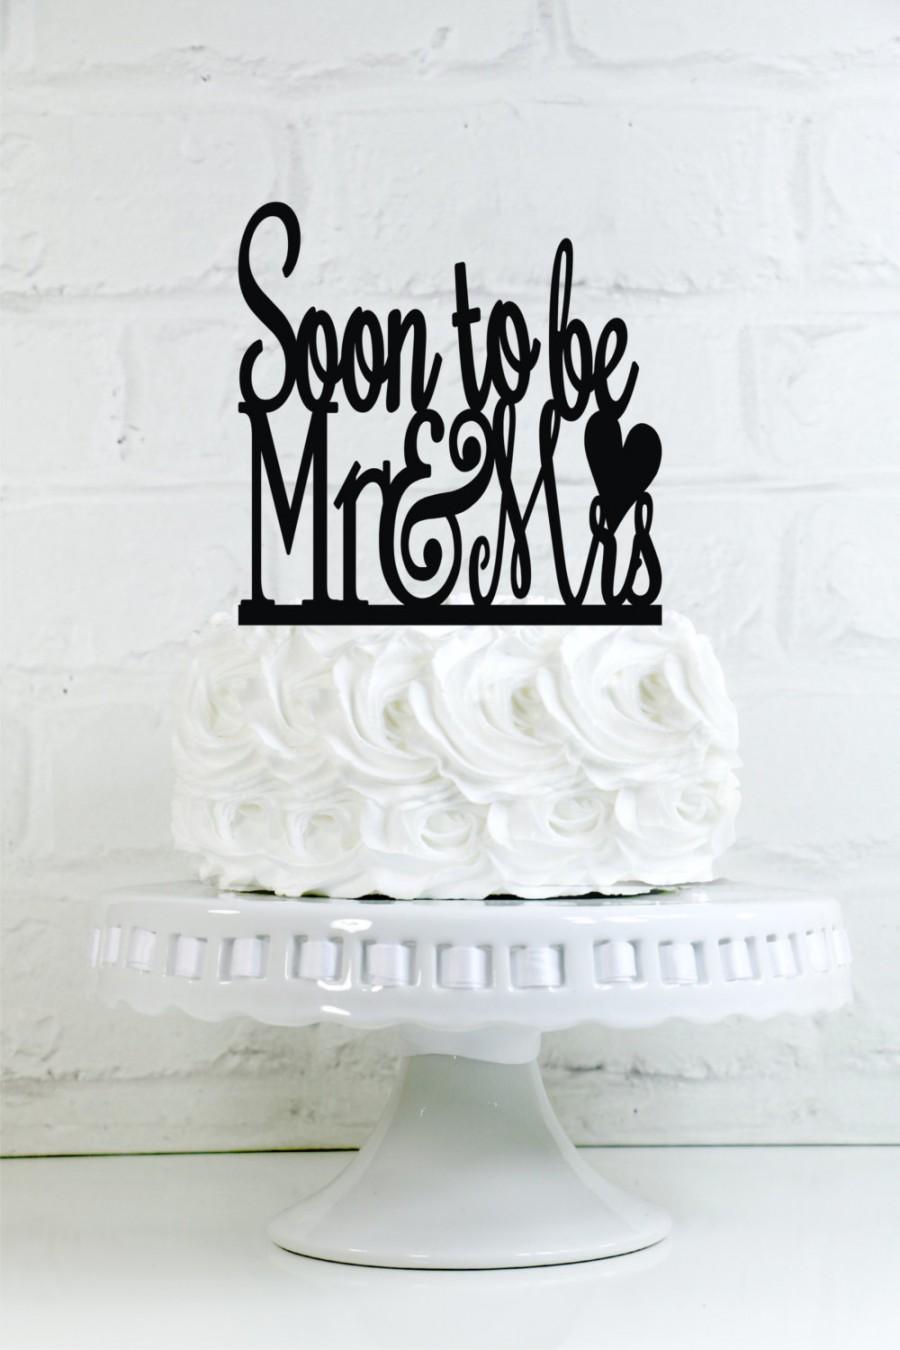 Wedding - Soon to be Mr and Mrs Engagement Party Cake Topper or Sign with a heart